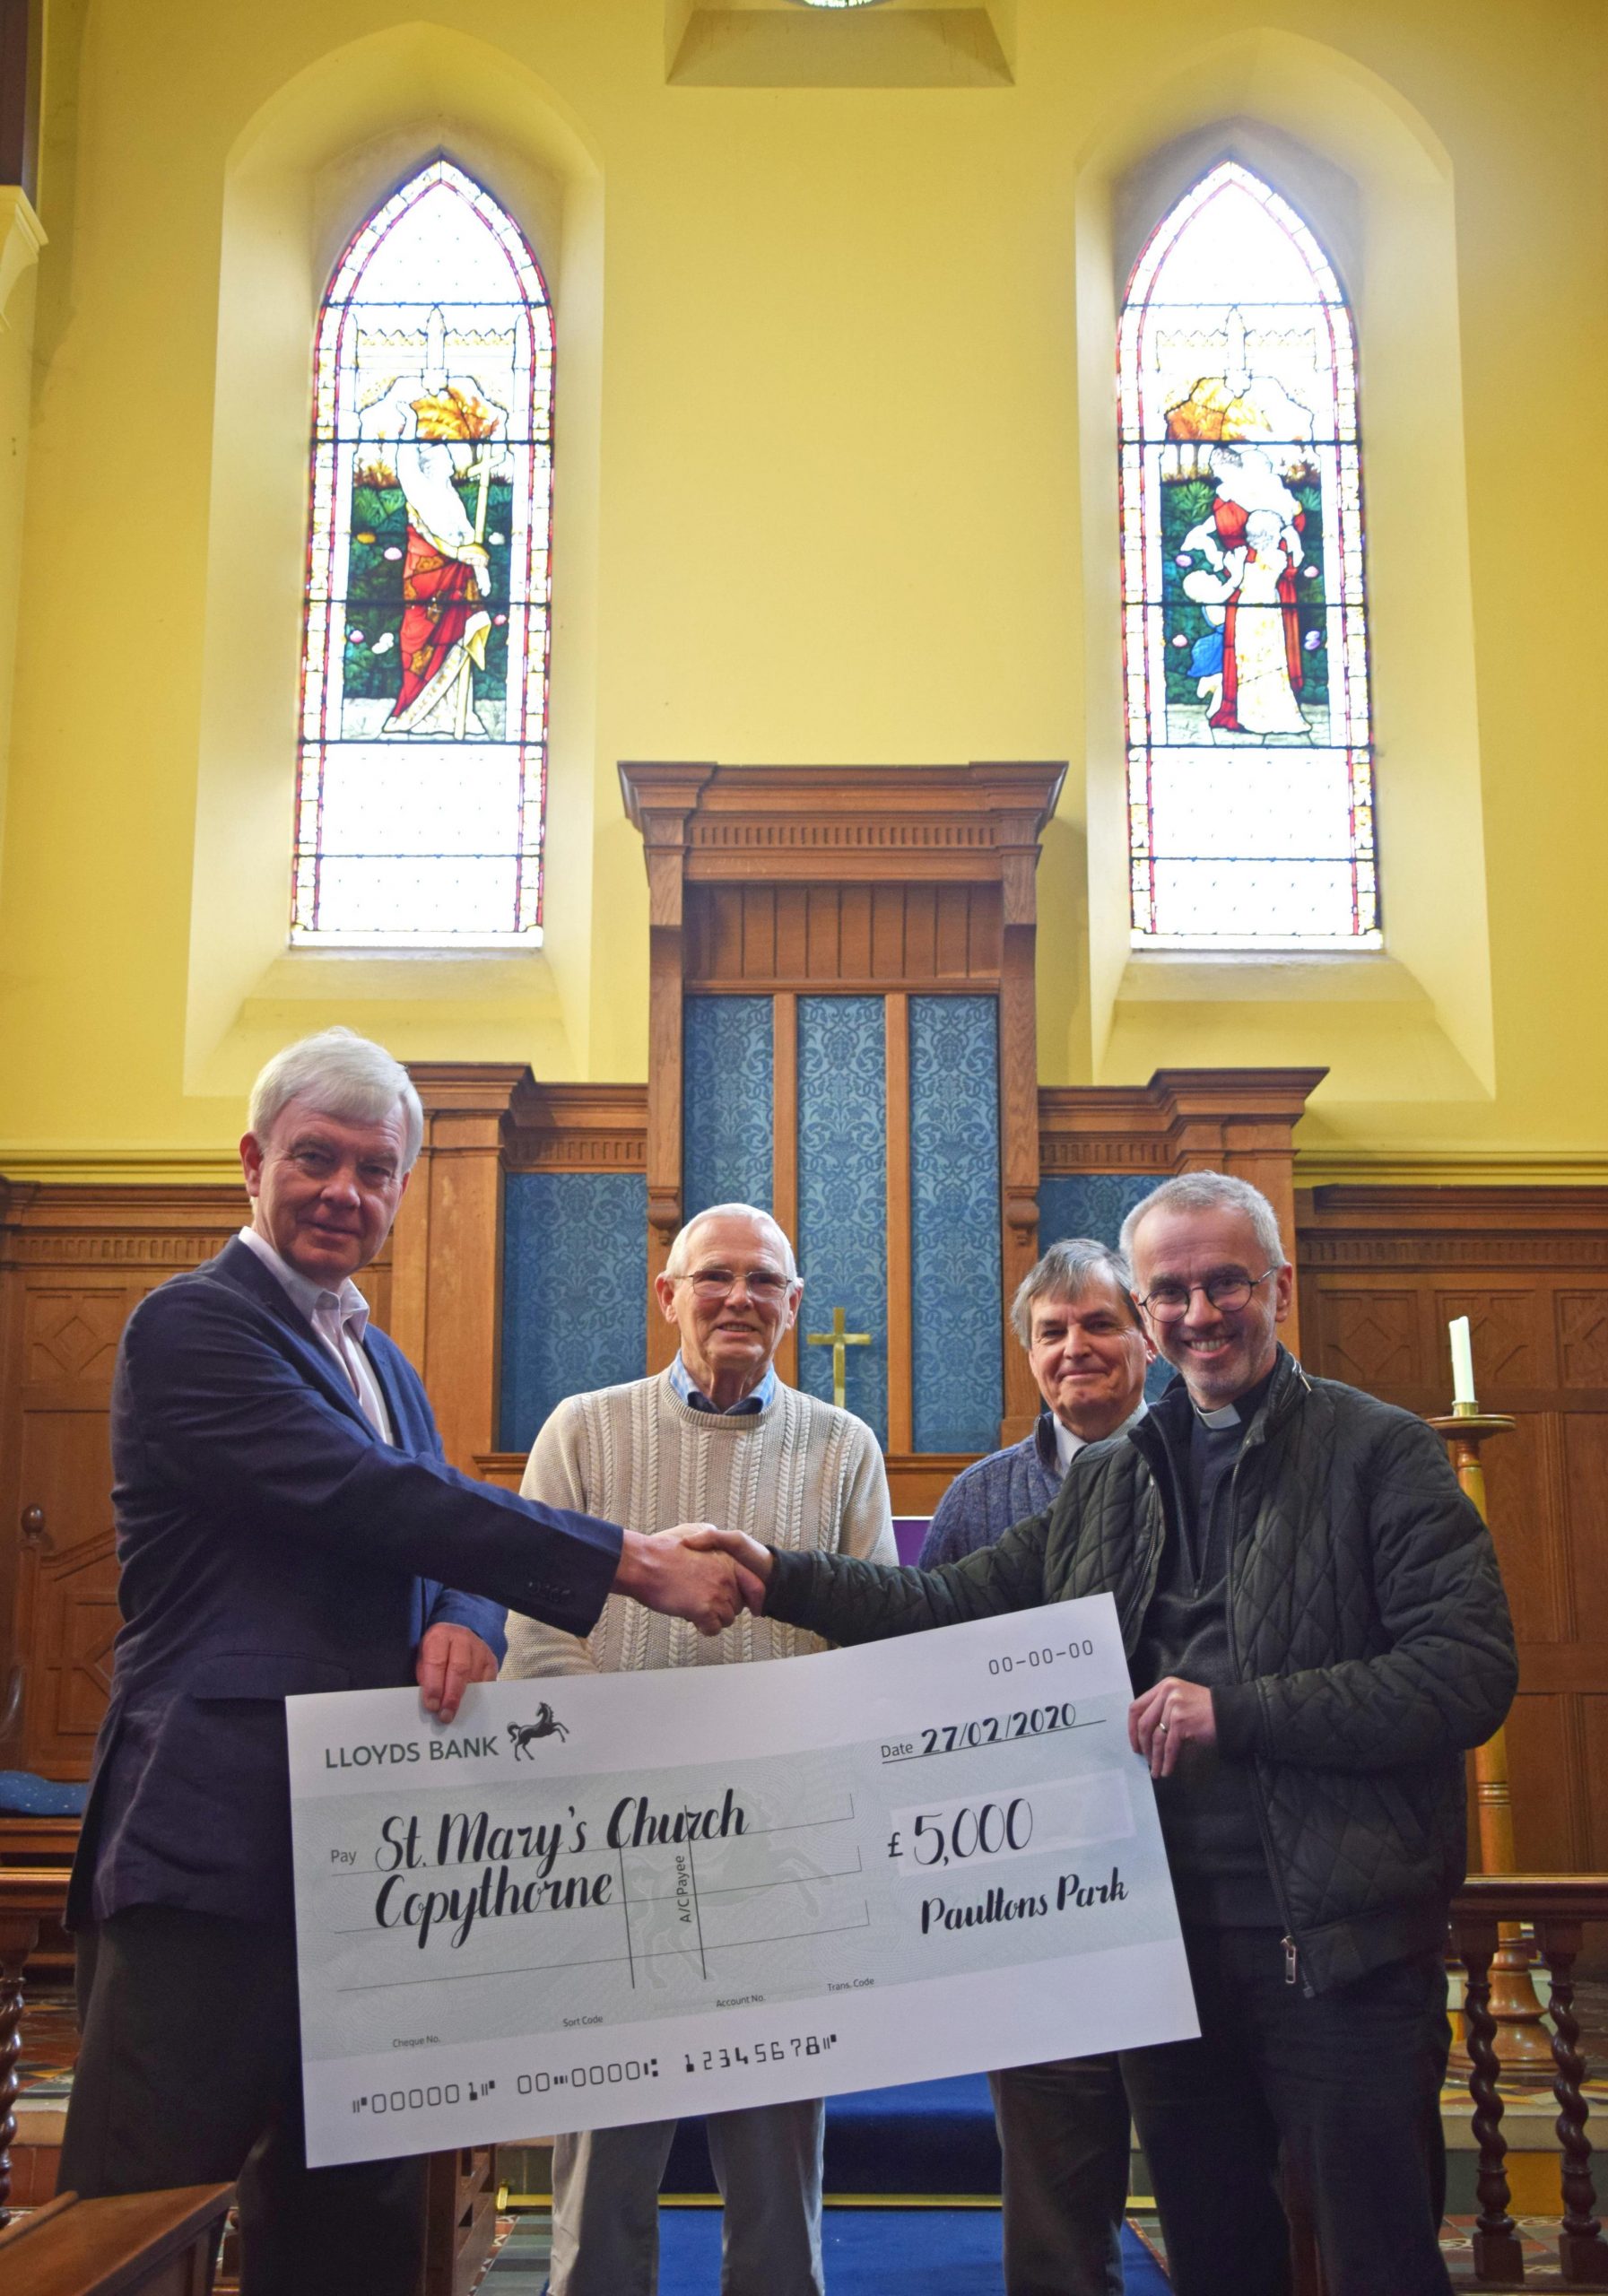 cheque presentation to St Mary's Church